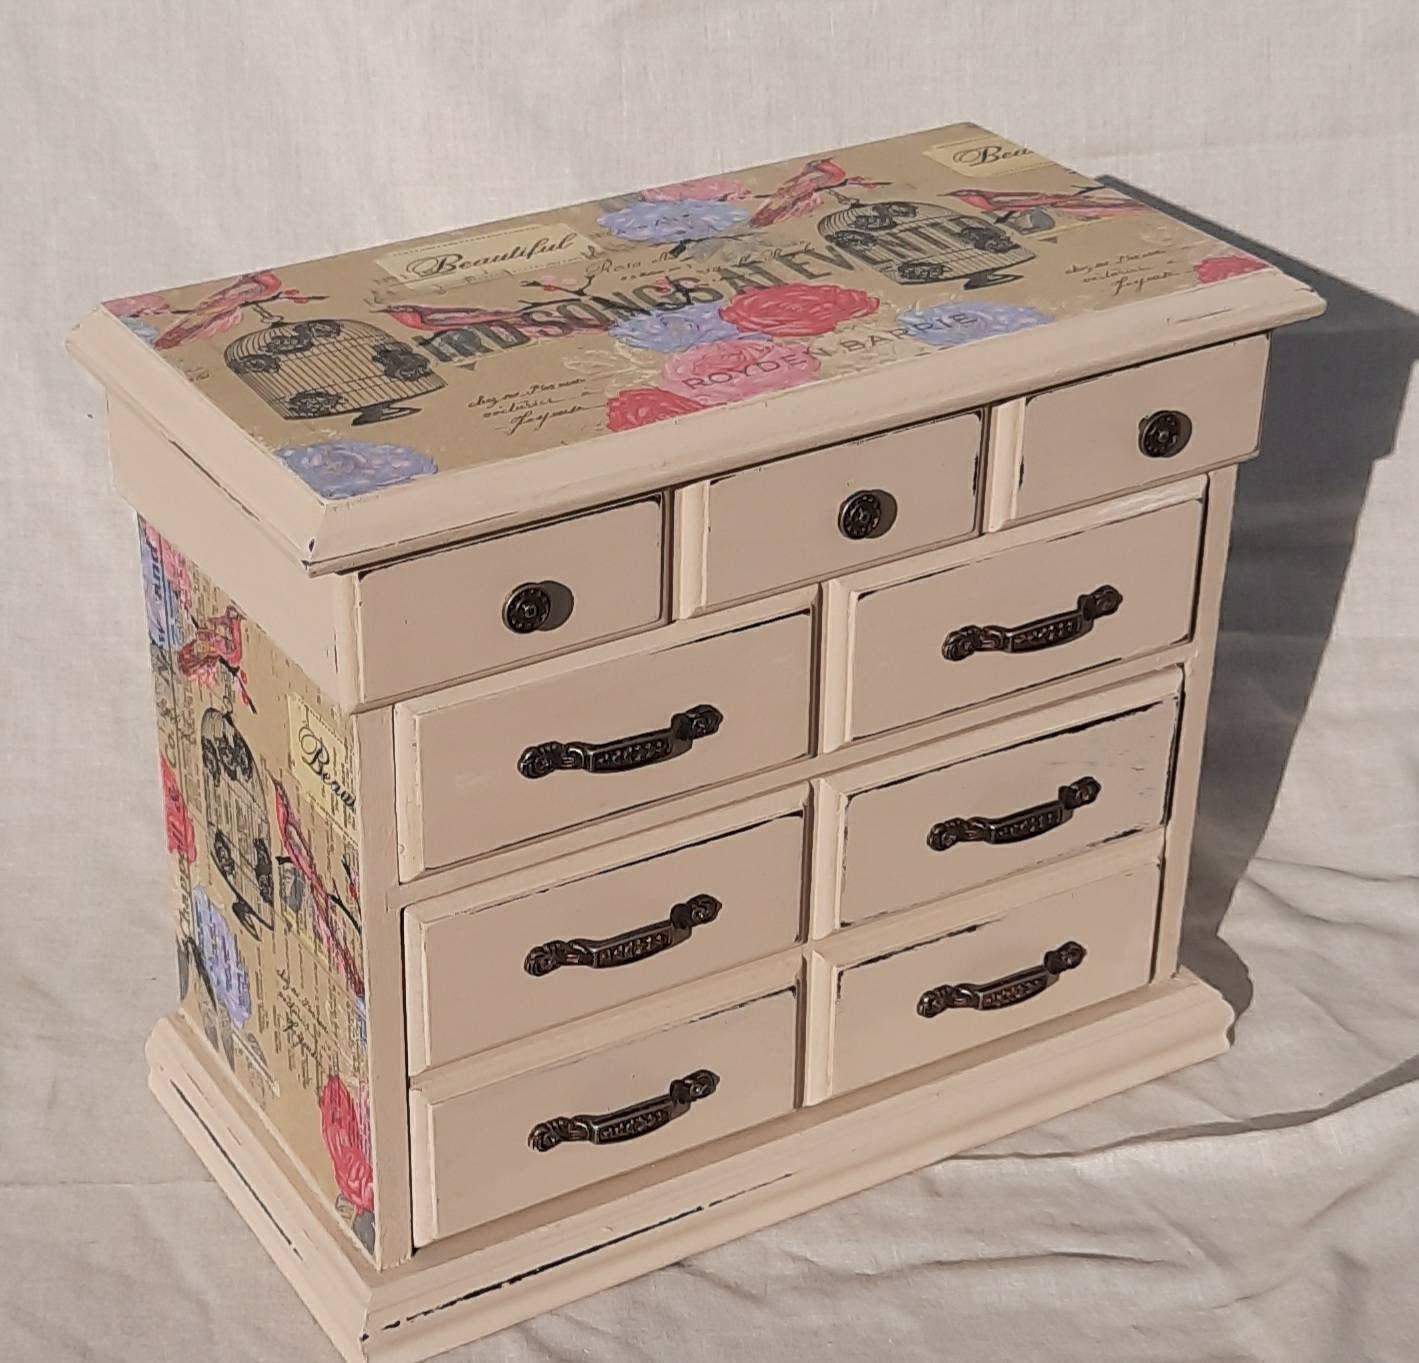 Large vintage jewellery box mini chest drawers,bird cage,french hand  decorated with decoupage, music paper shabby chic pink bird,vintage